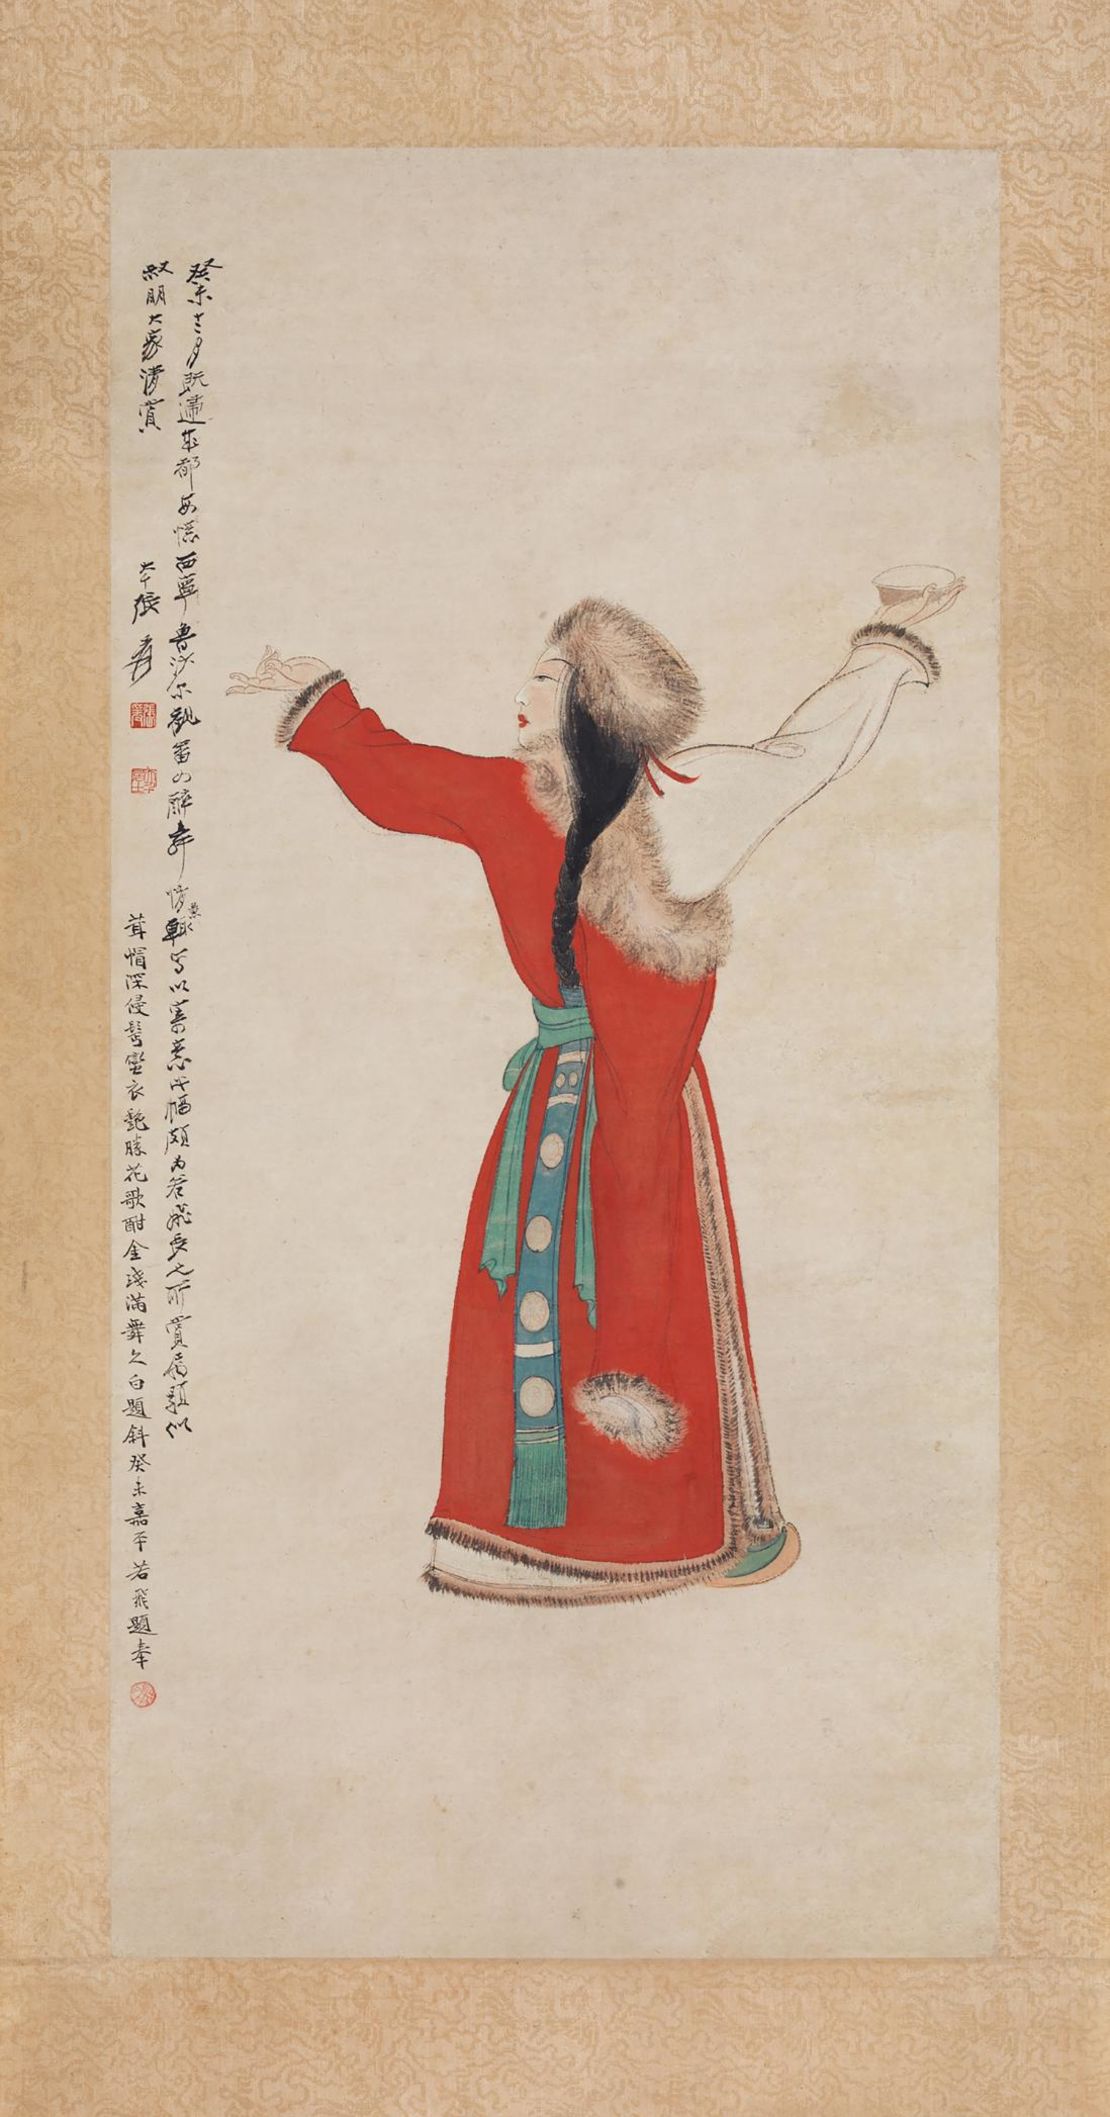 A hanging ink-painted scroll titled "The Drunken Dance" (1943), an earlier, figurative work completed by Zhang while still living in China.